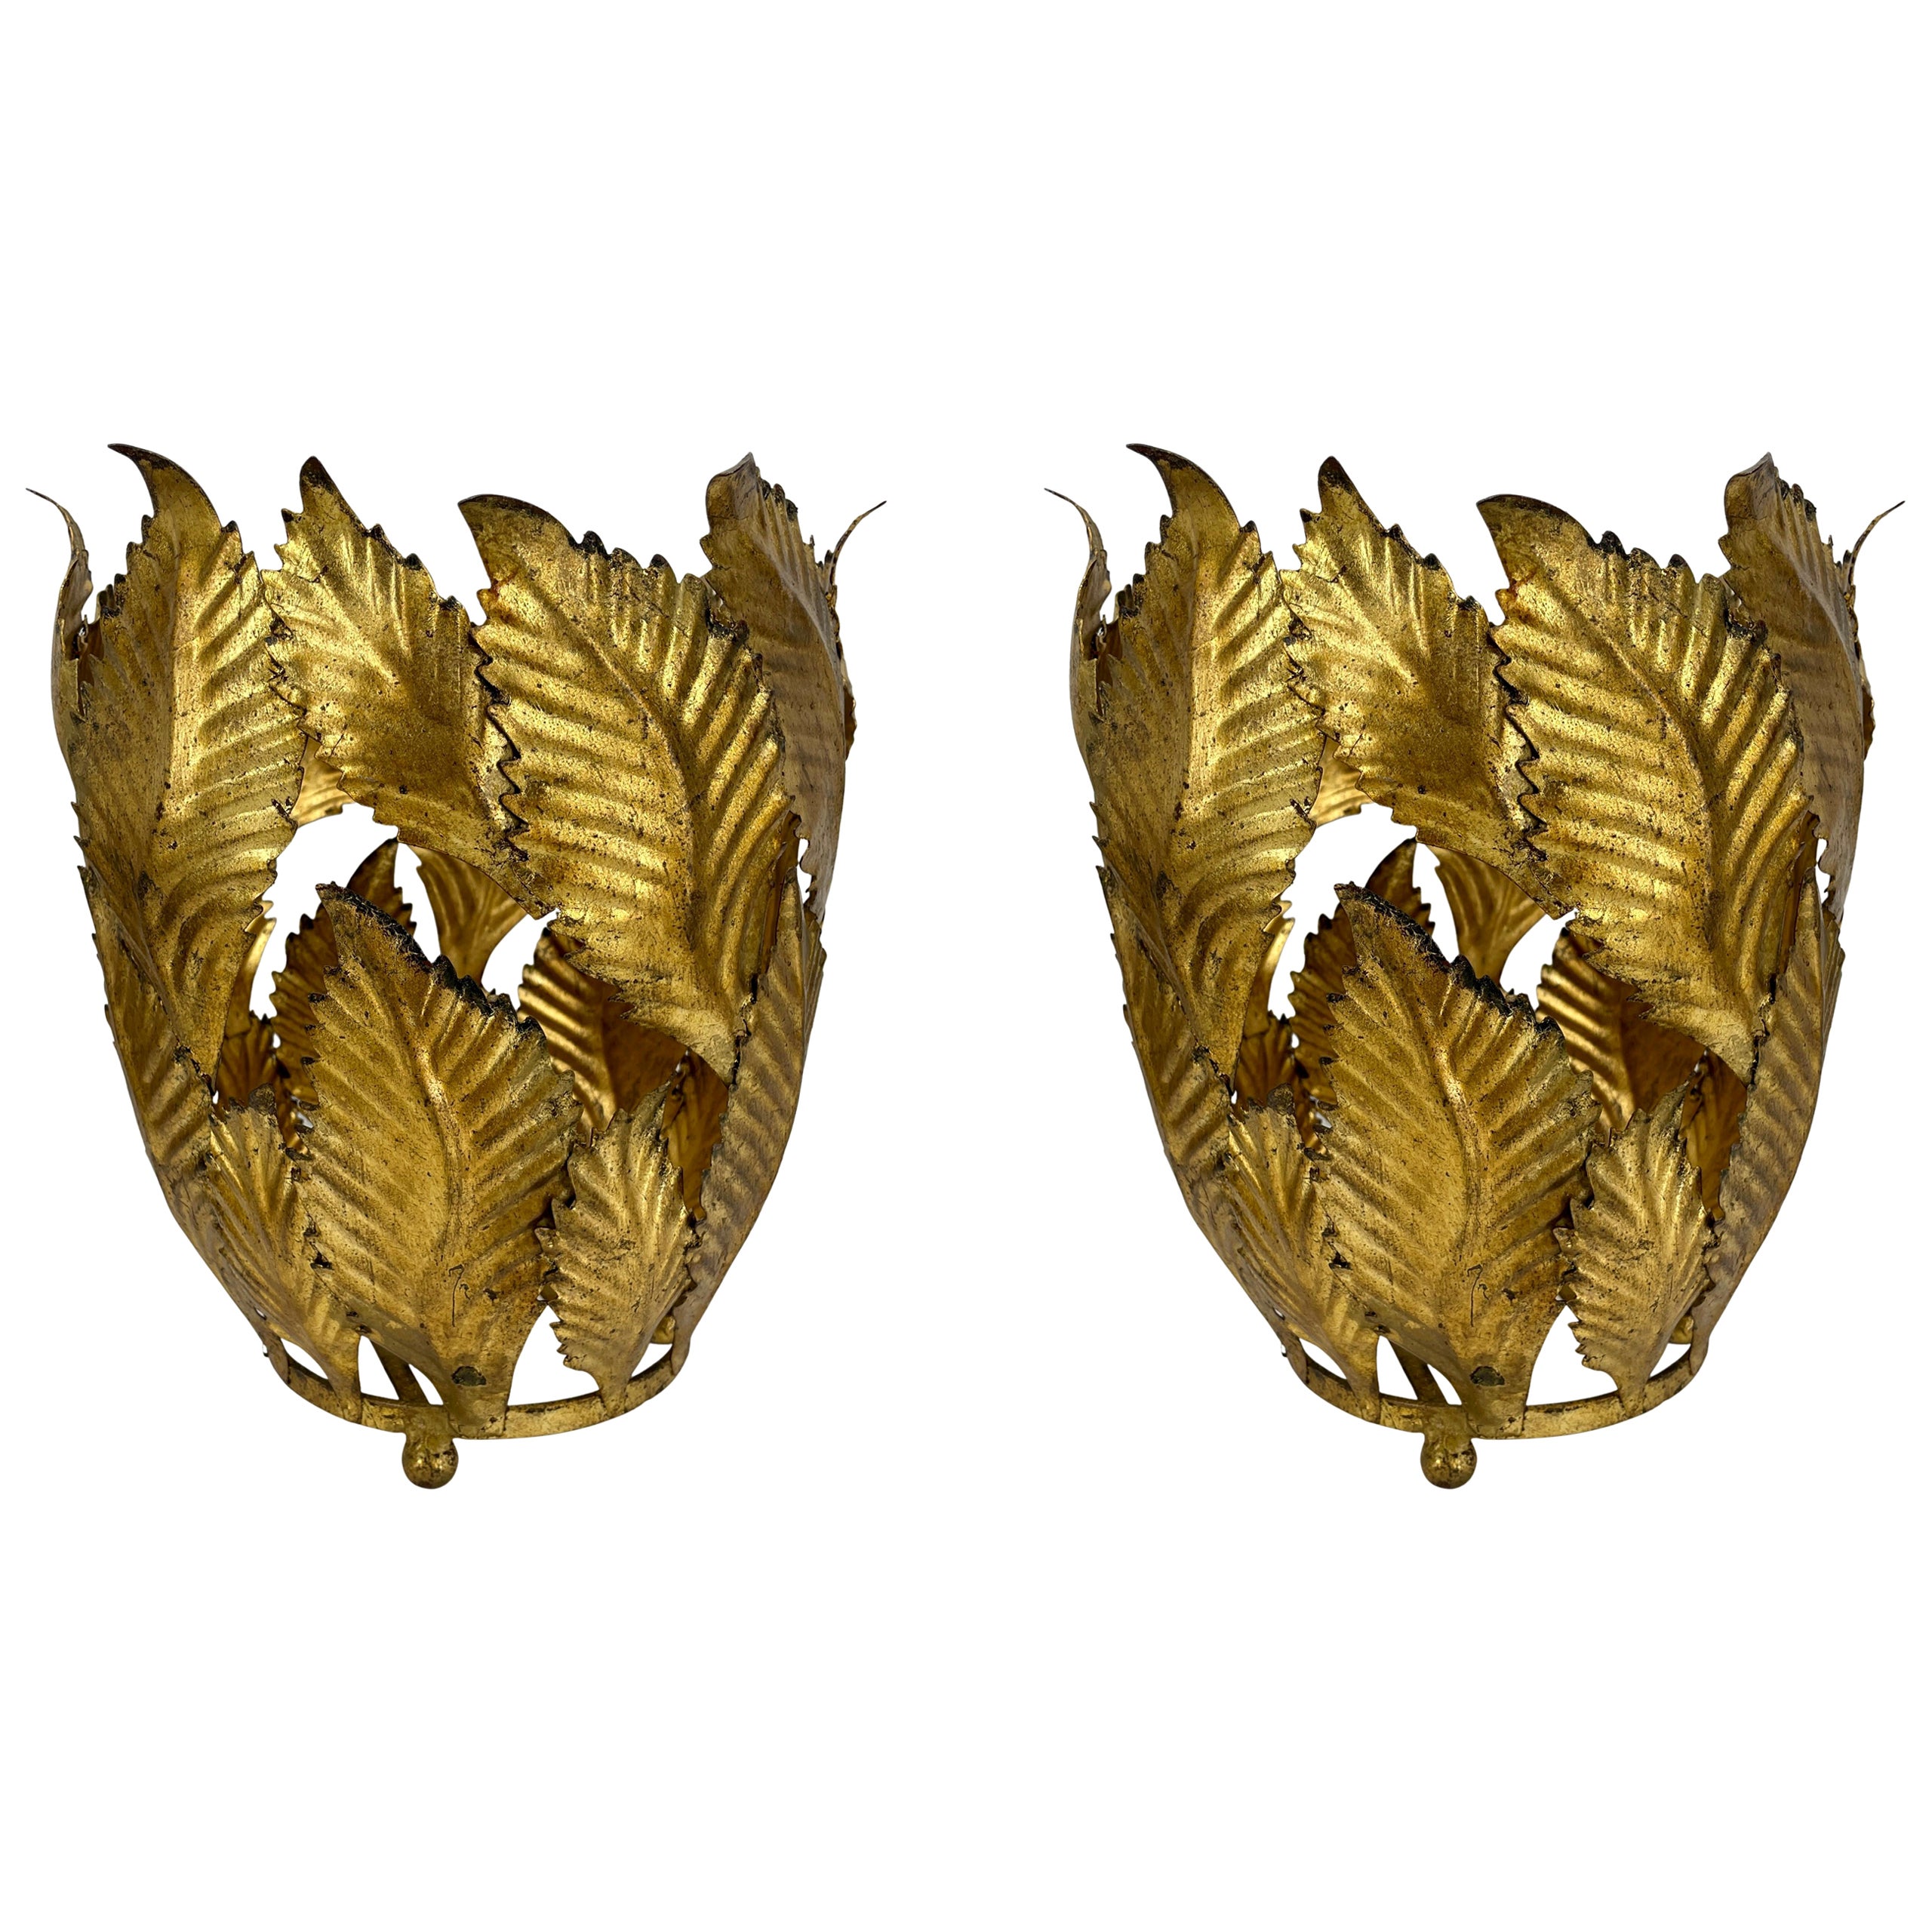 Pair of Italian Gold Gilt Tole Planter Cachepots with Leaves